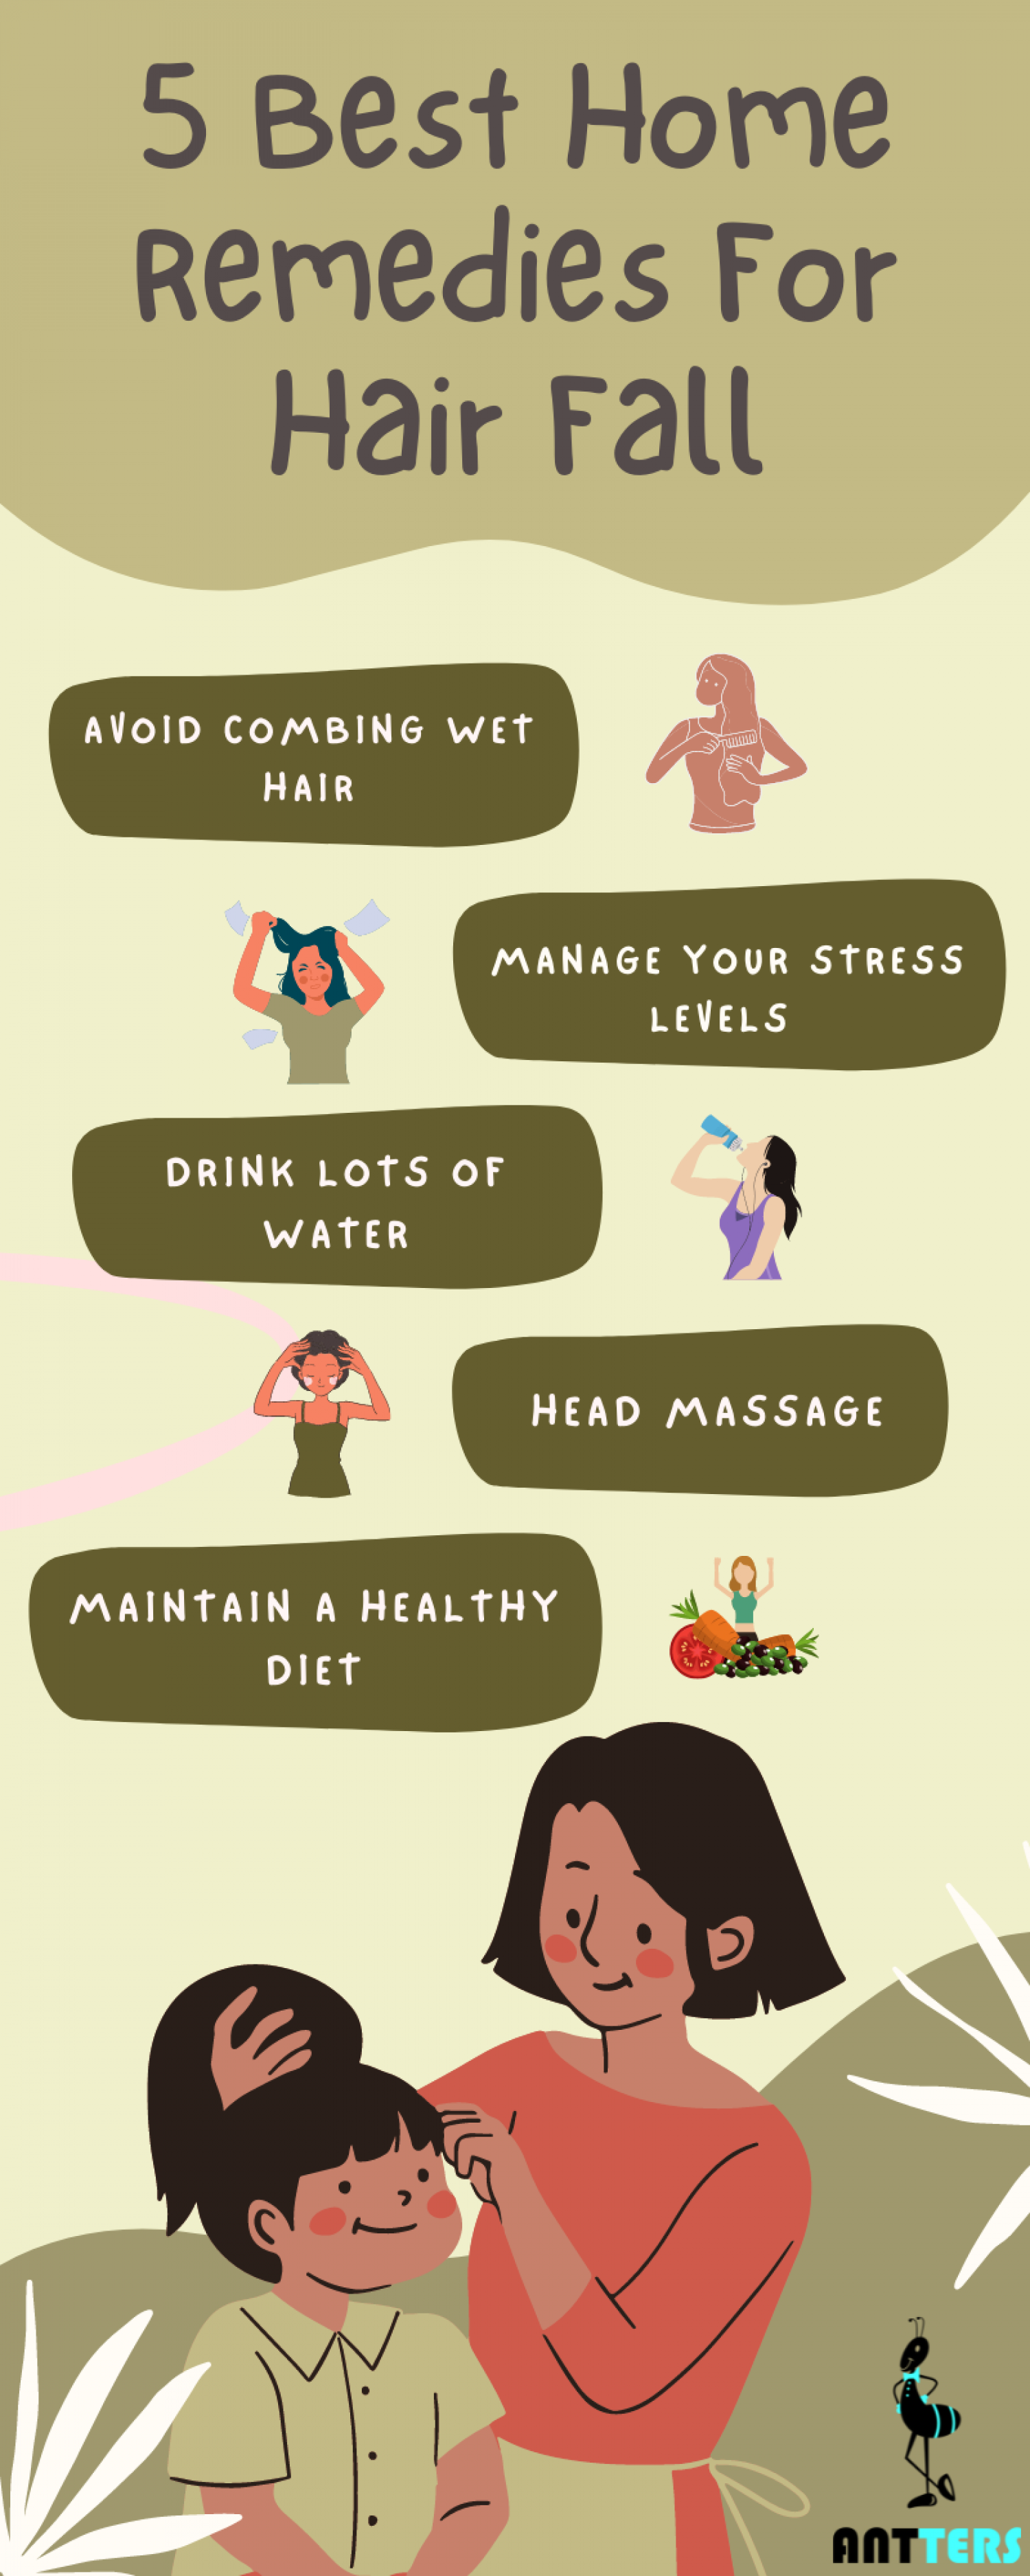 5 Best Home Remedies For Hair Fall Infographic